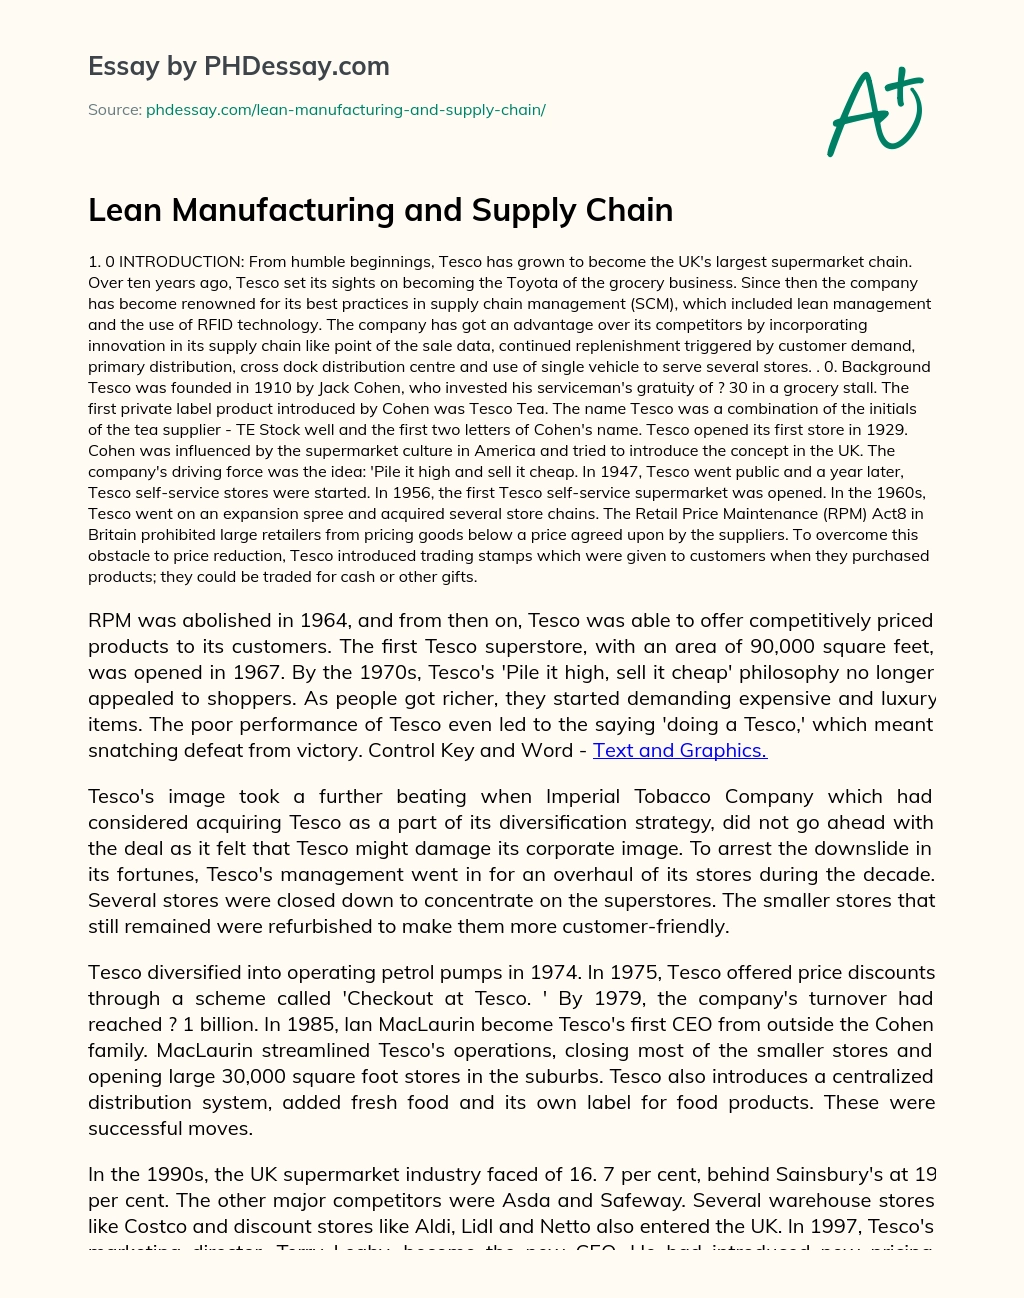 Lean Manufacturing and Supply Chain essay